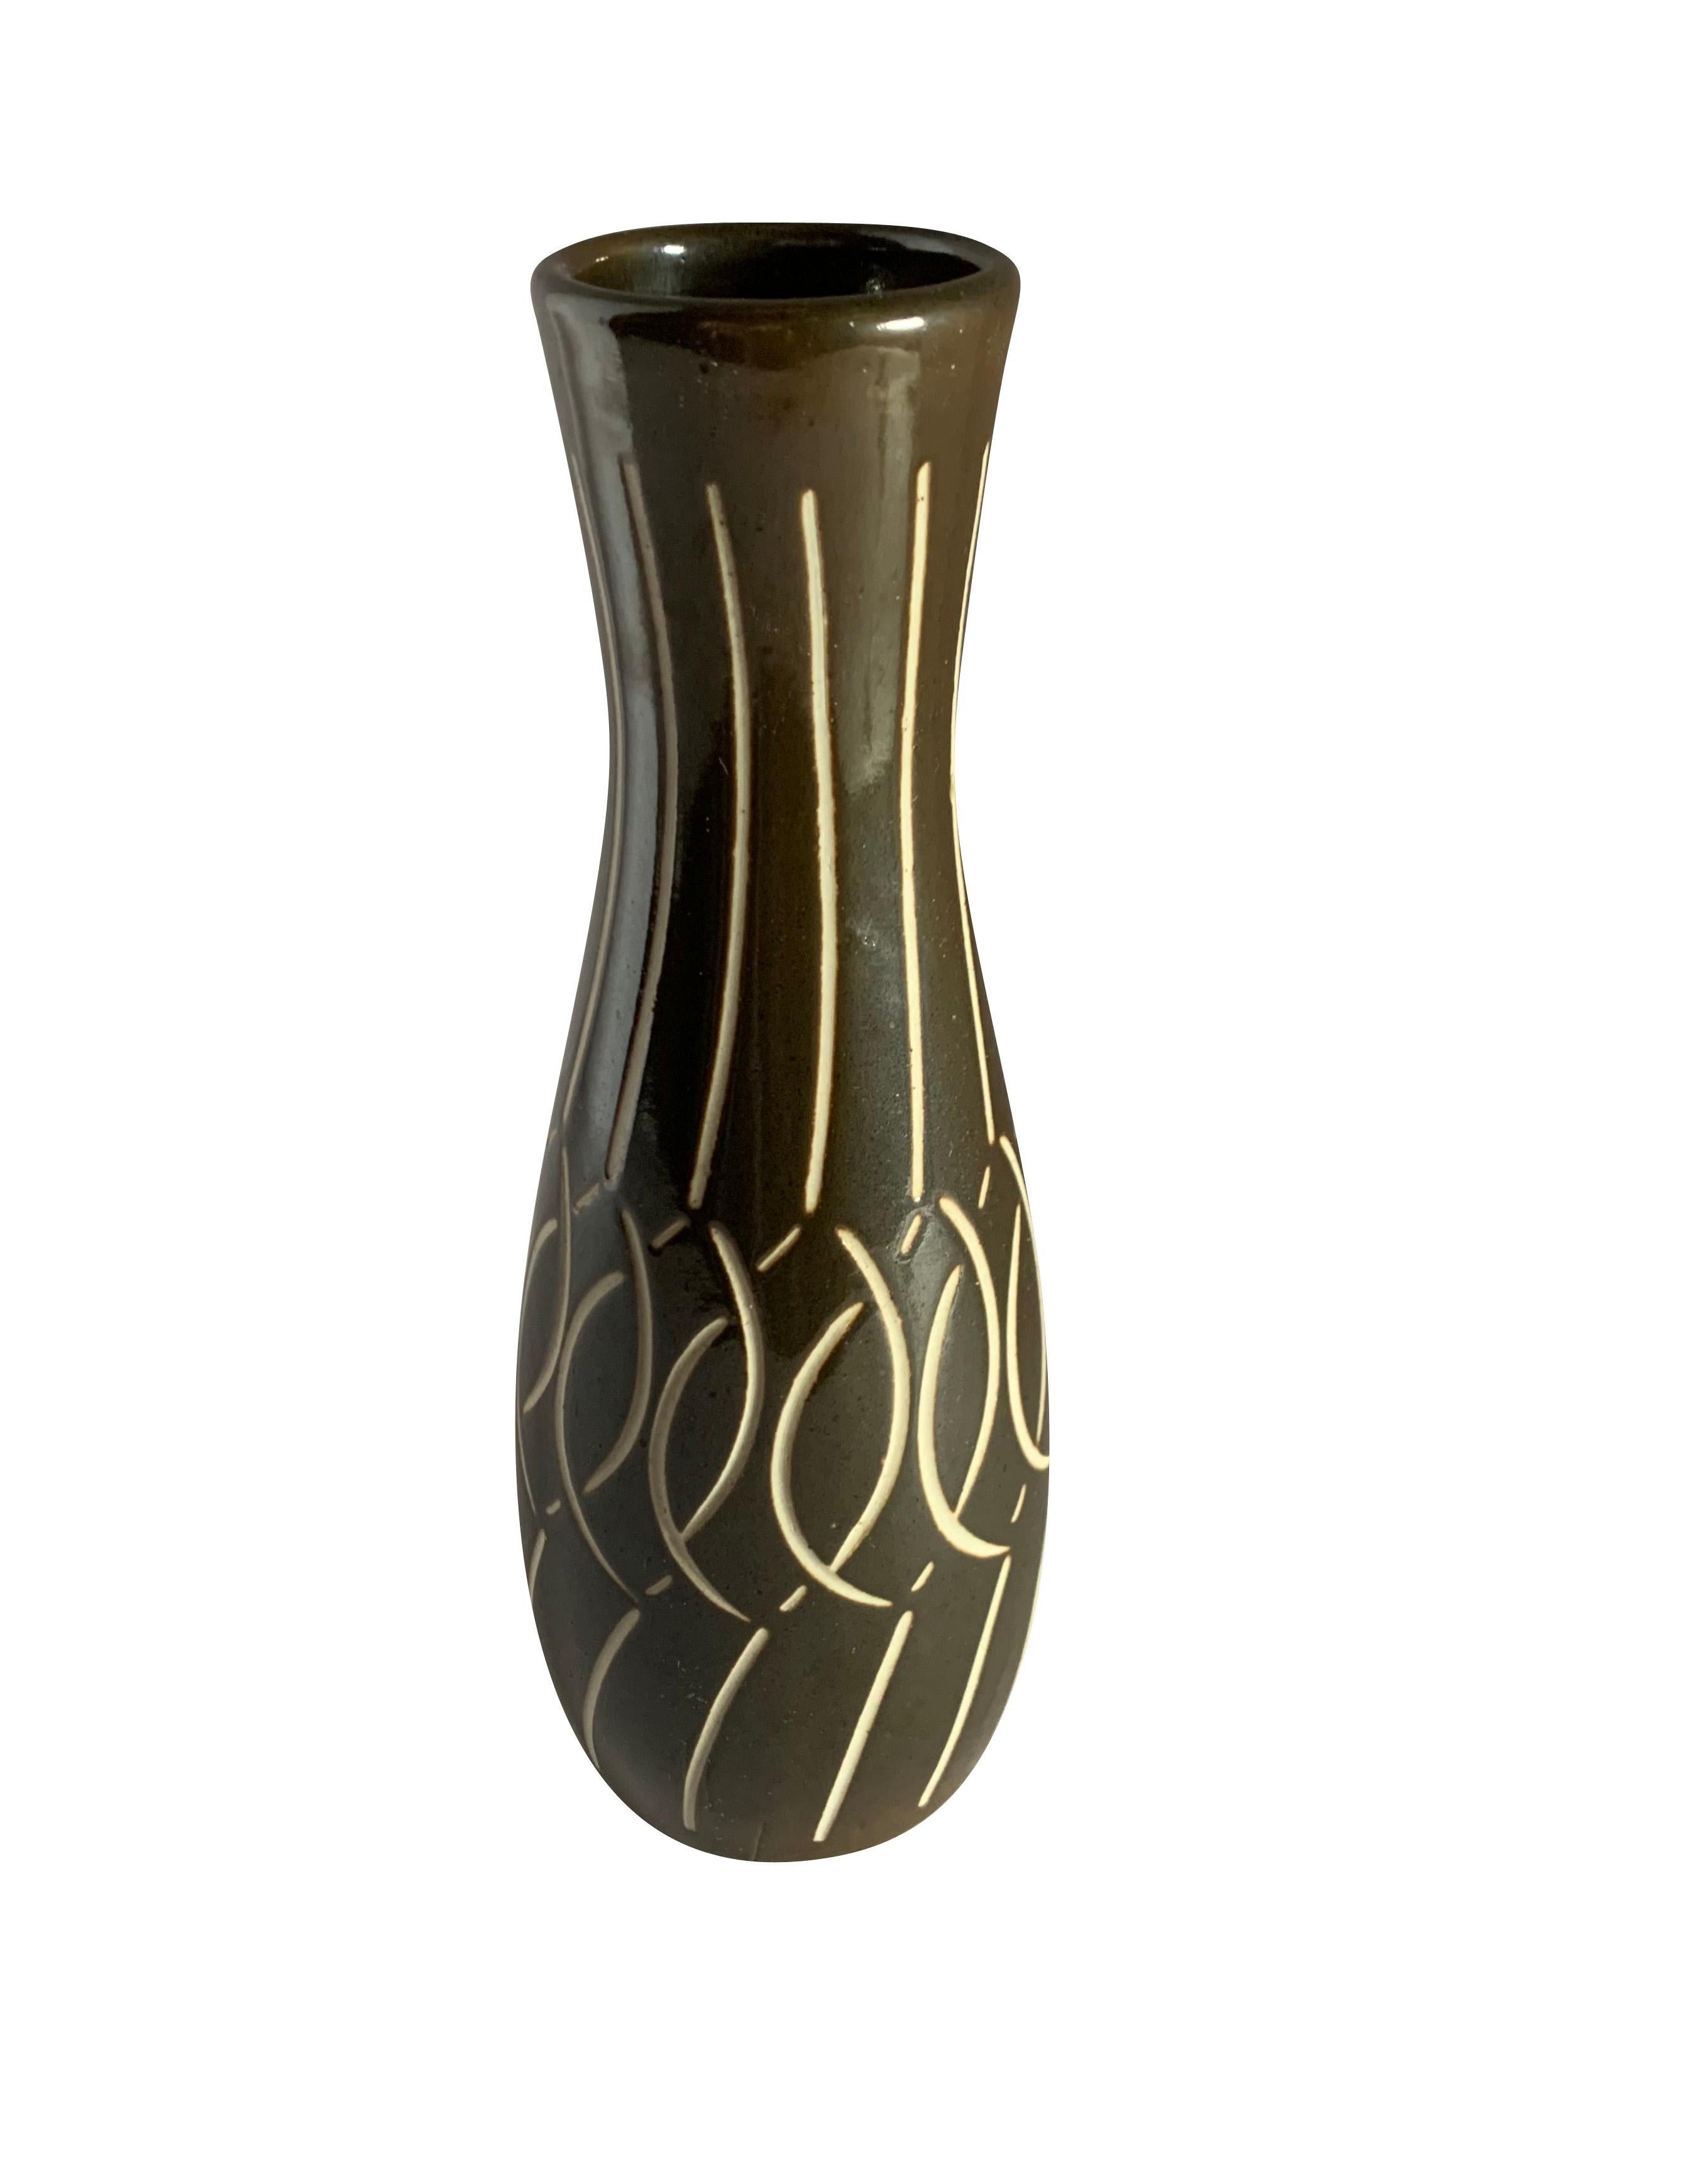 Mid century East German vase.
Dark brown and cream decorative design.
Part of a large collection.